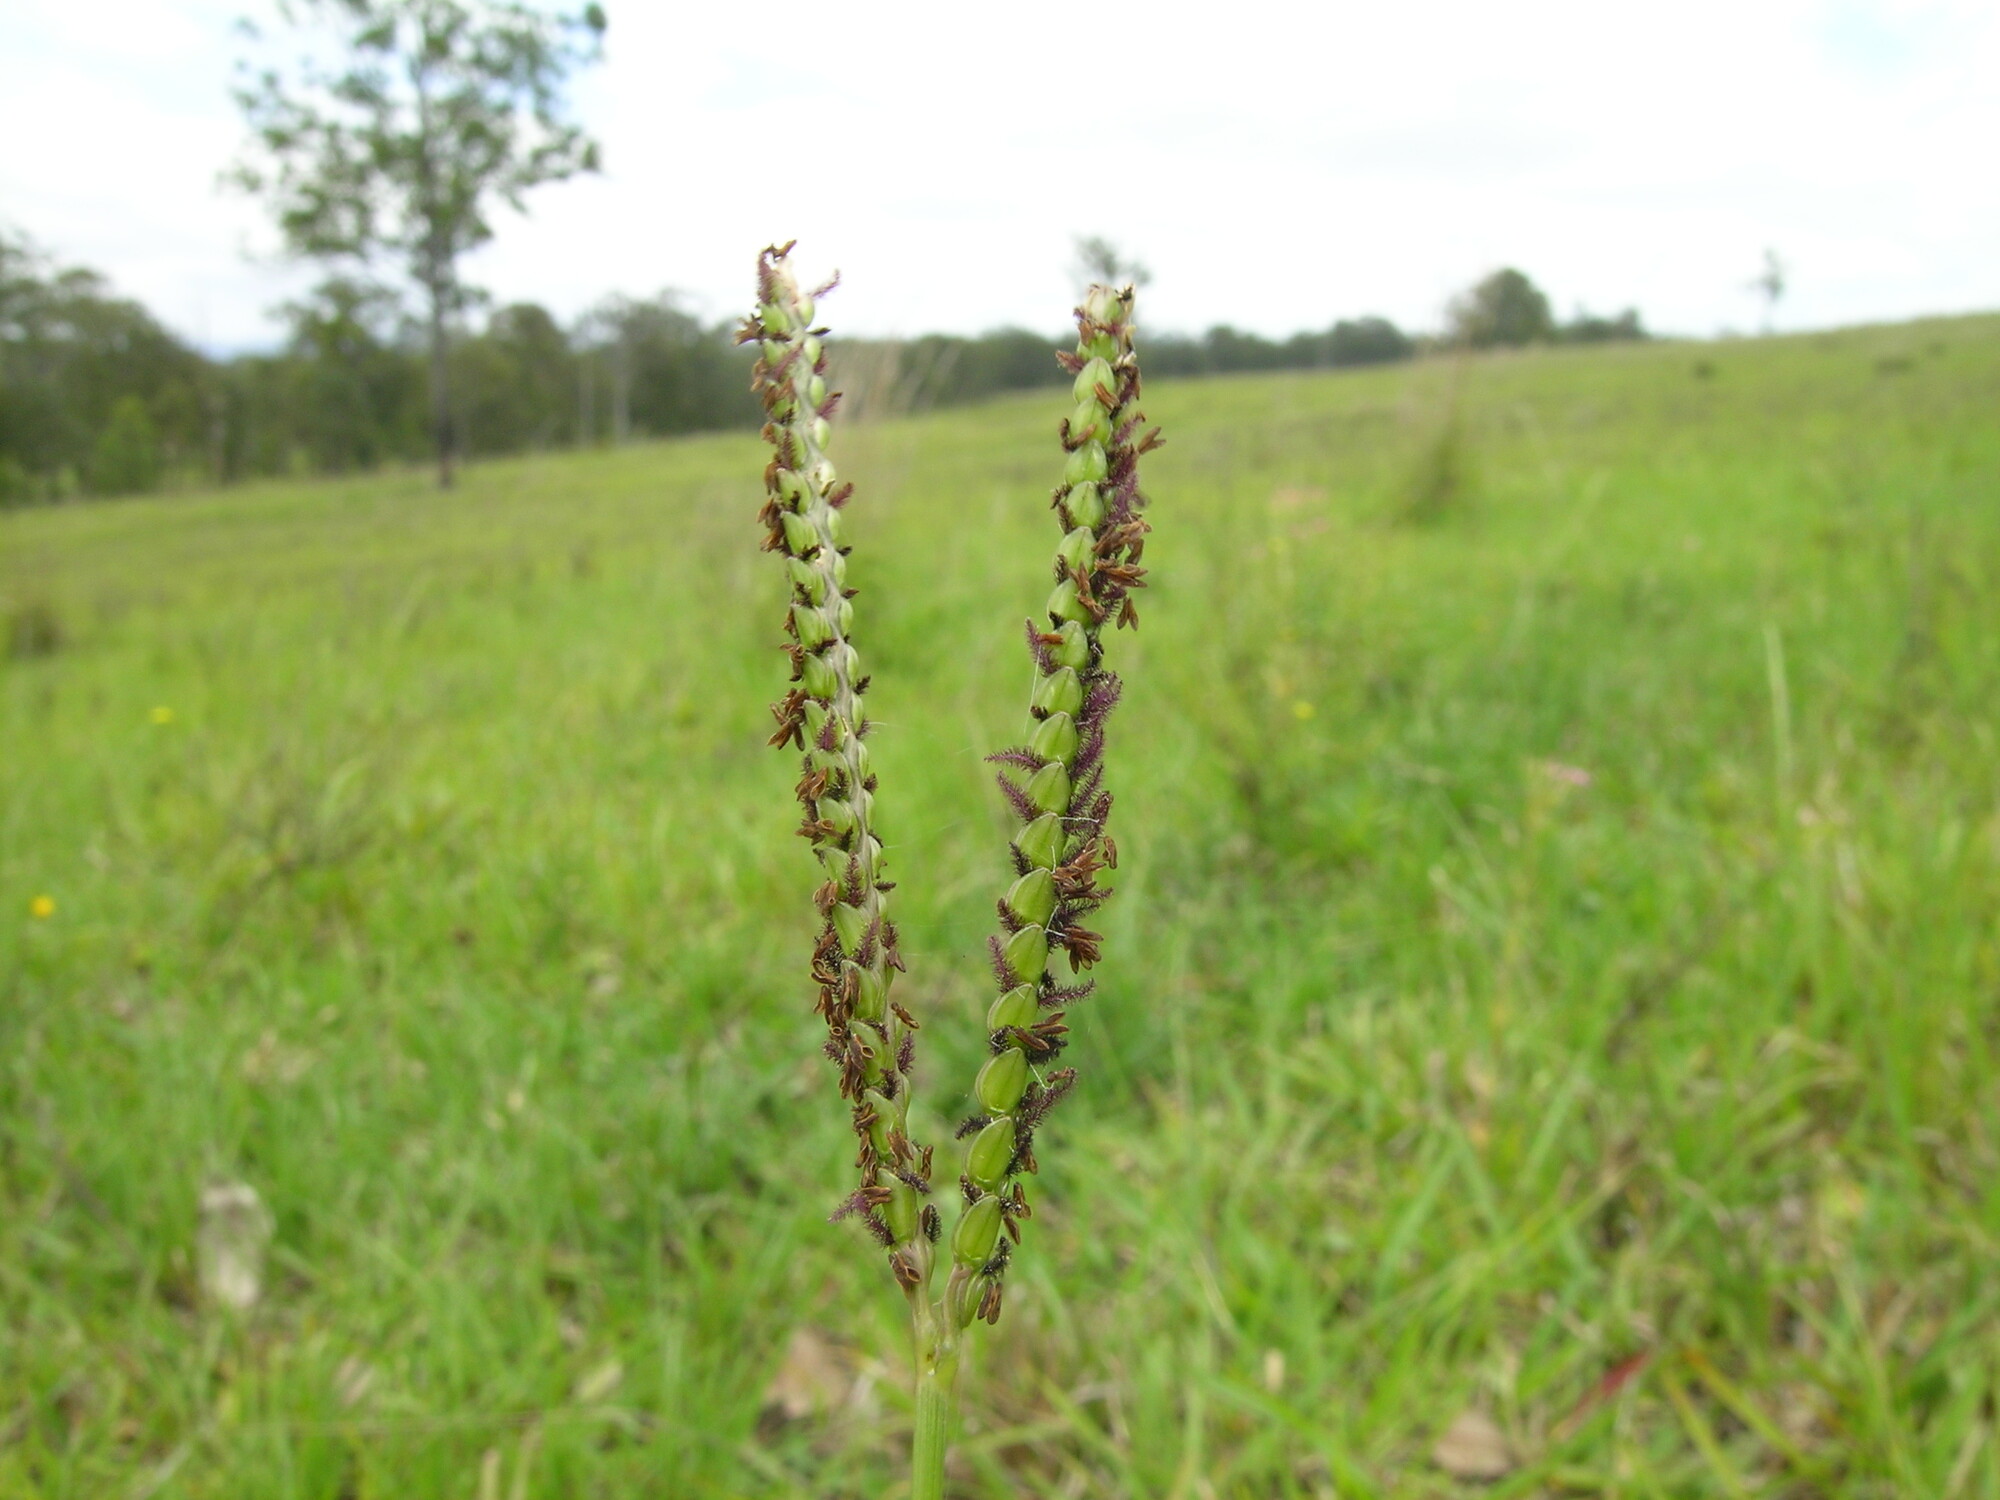 Photograph of an inflorescence of Bahia grass. The inflorescence is made up of two branches radiating from a single point. Brown anthers are hanging out of the spikelets in the inflorescense.